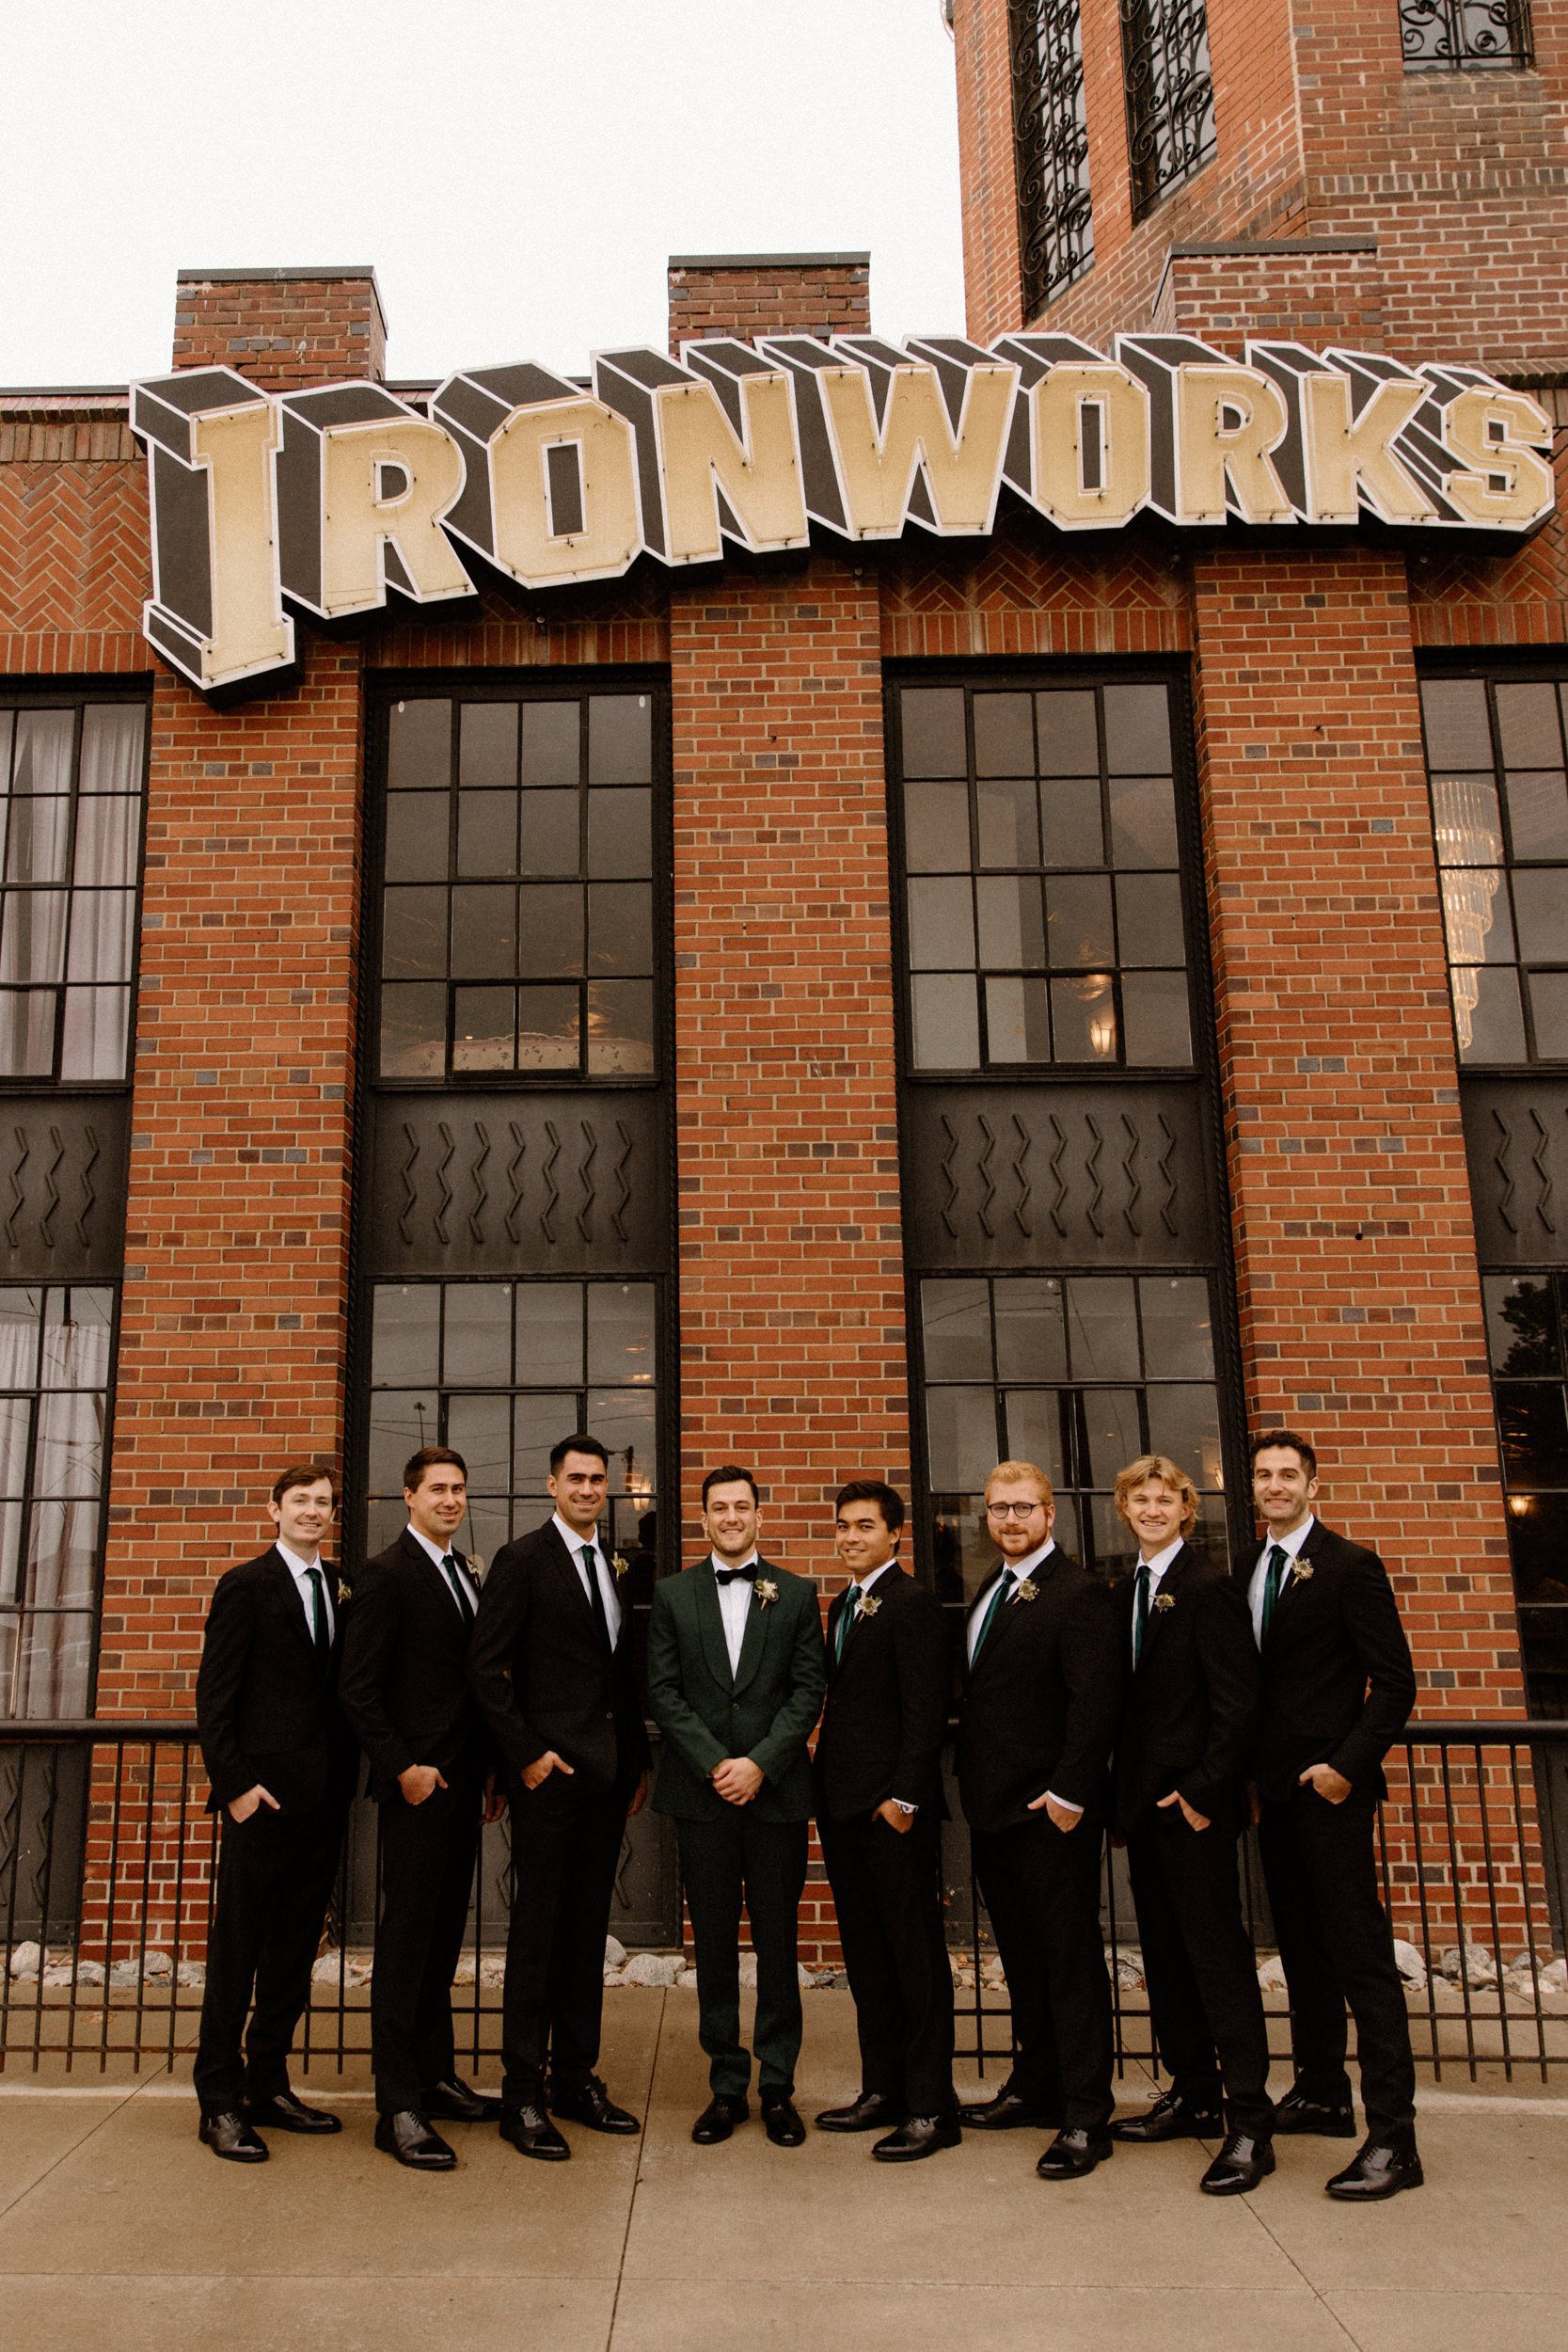 The groom and groomsmen pose under the Ironworks sign